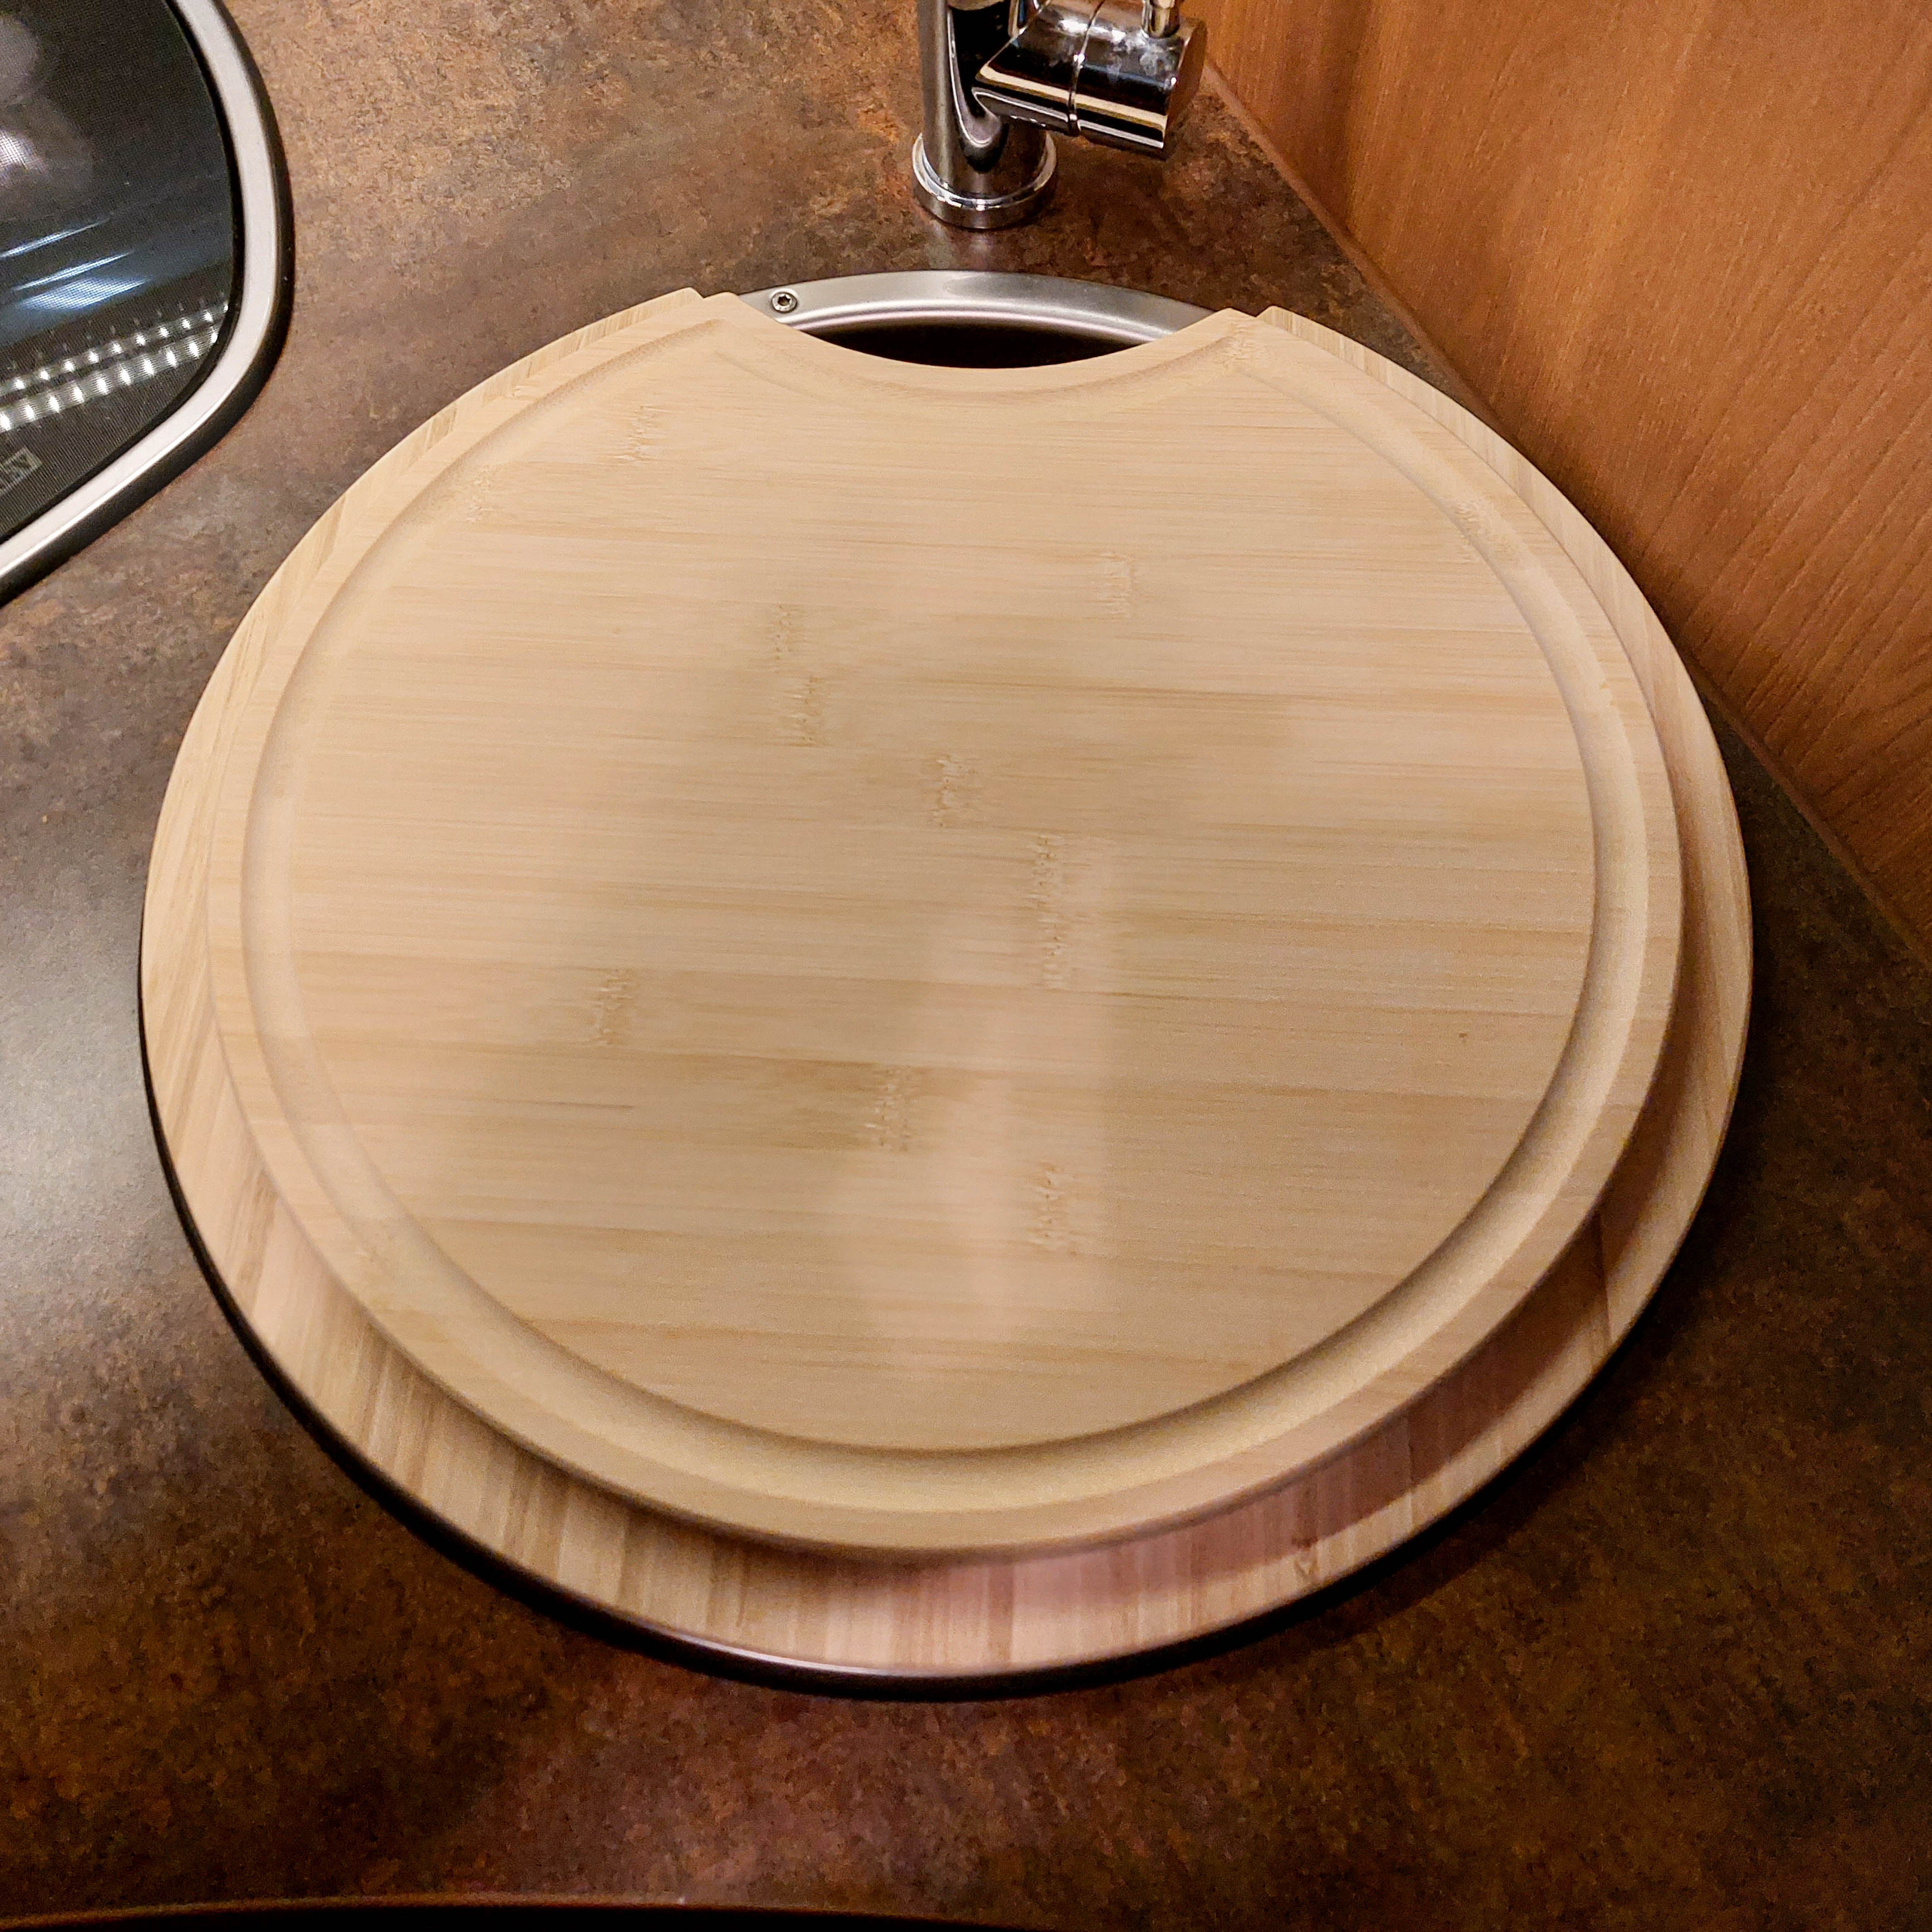 Cutting board with sink cover for Giottiline models